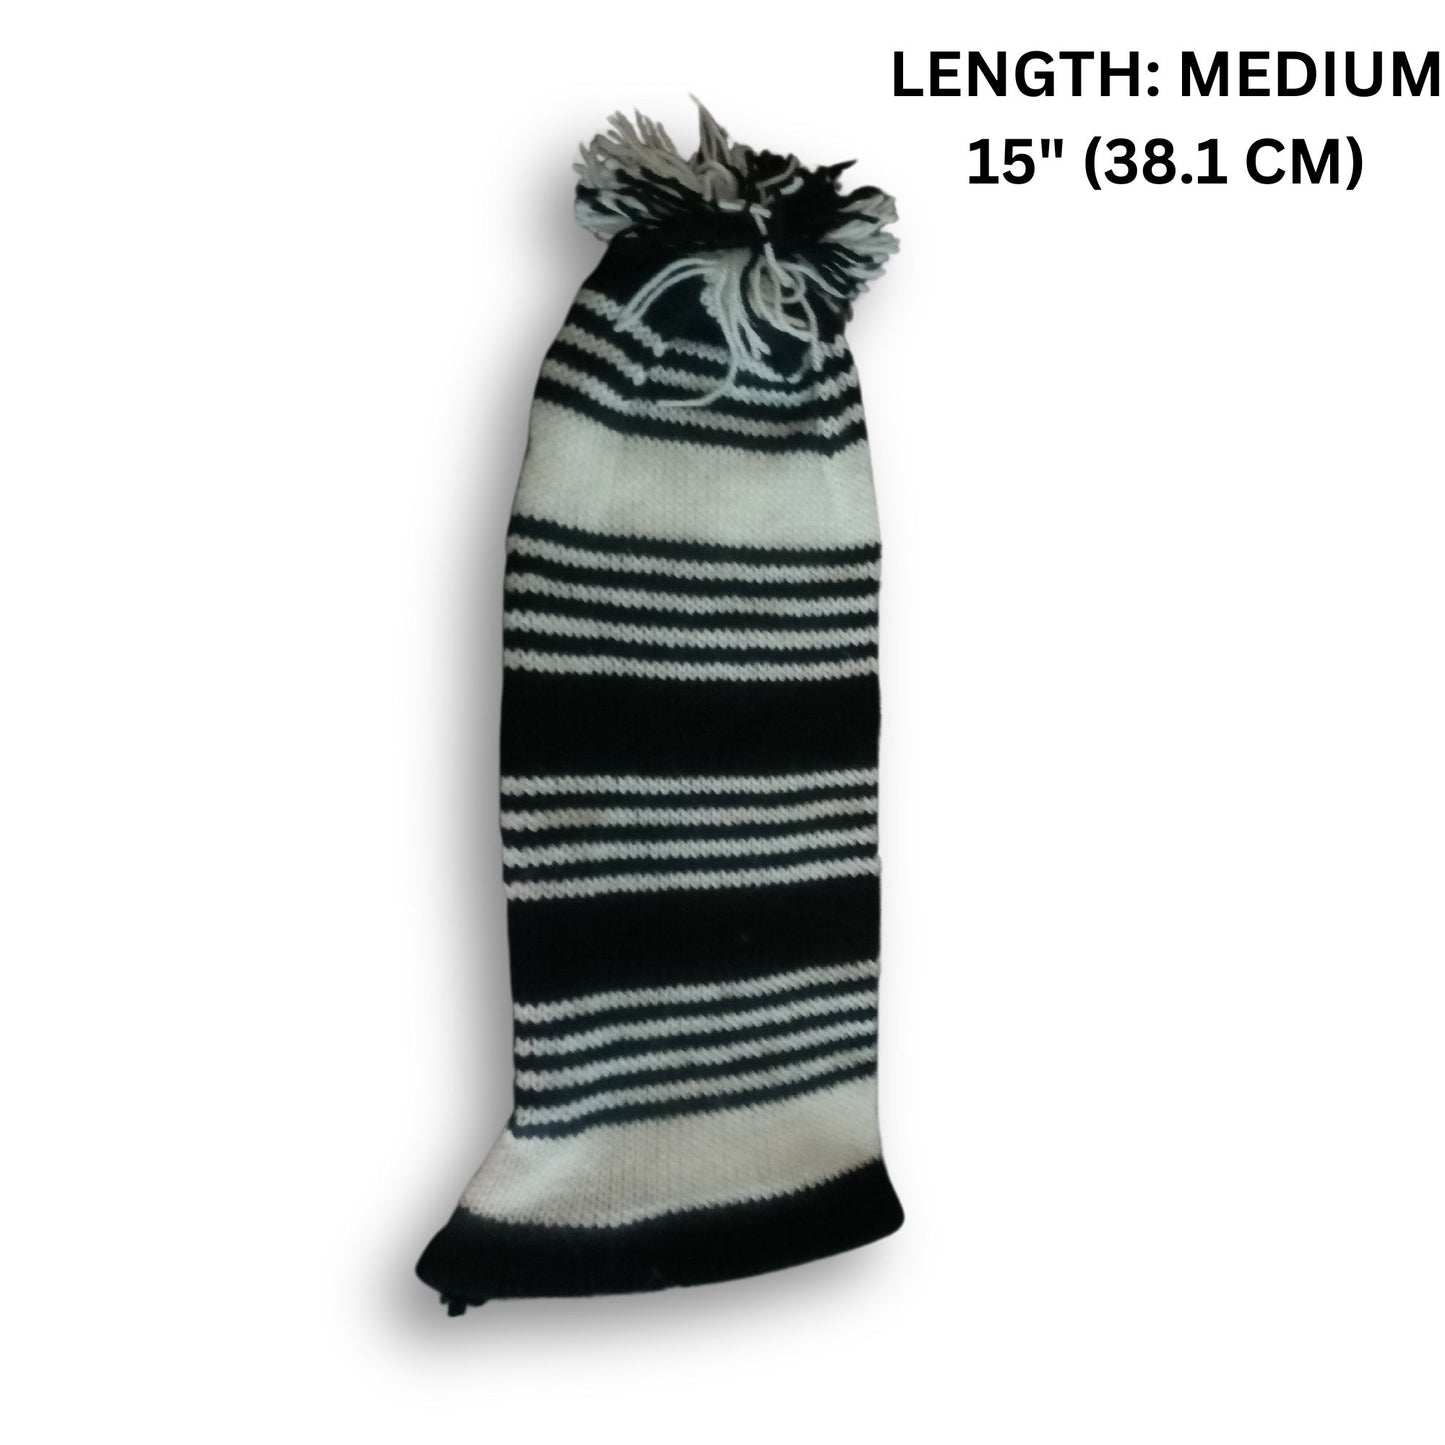 Wool Igbo Traditional Men's Hat, Men's Knitted, Stripped Wool, Black and White War Dance Hat (Long)